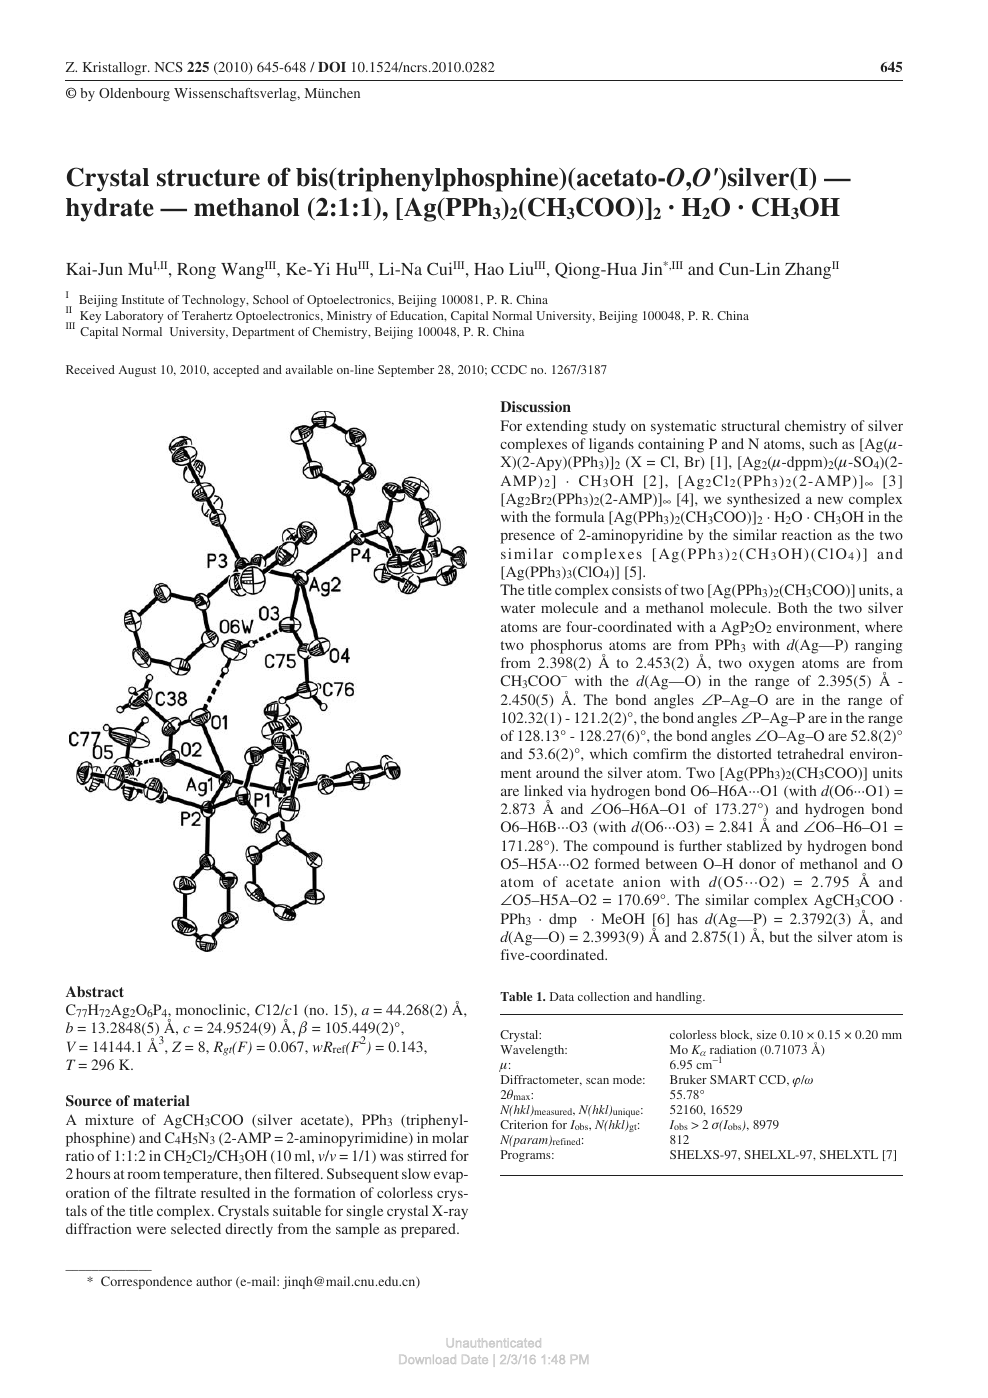 Crystal Structure Of Bis Triphenylphosphine Acetato O O Silver I Hydrate Methanol 2 1 1 Ag Pph3 2 Ch3coo 2 H2o Ch3oh Topic Of Research Paper In Biological Sciences Download Scholarly Article Pdf And Read For Free On Cyberleninka Open